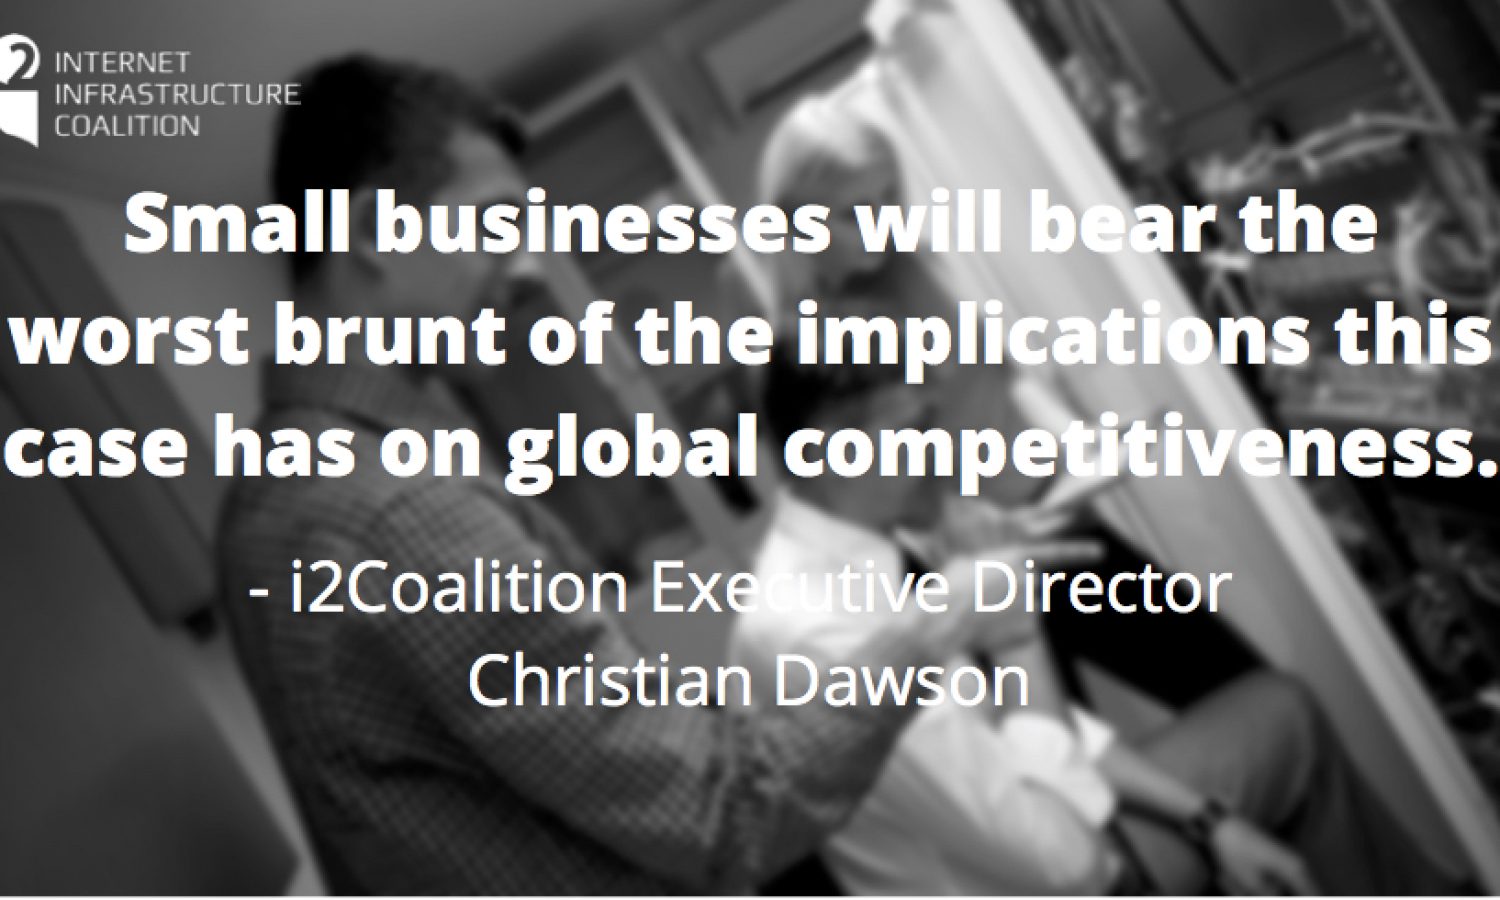 Small businesses will bear the worst brunt of the implications this case has on global competitiveness.